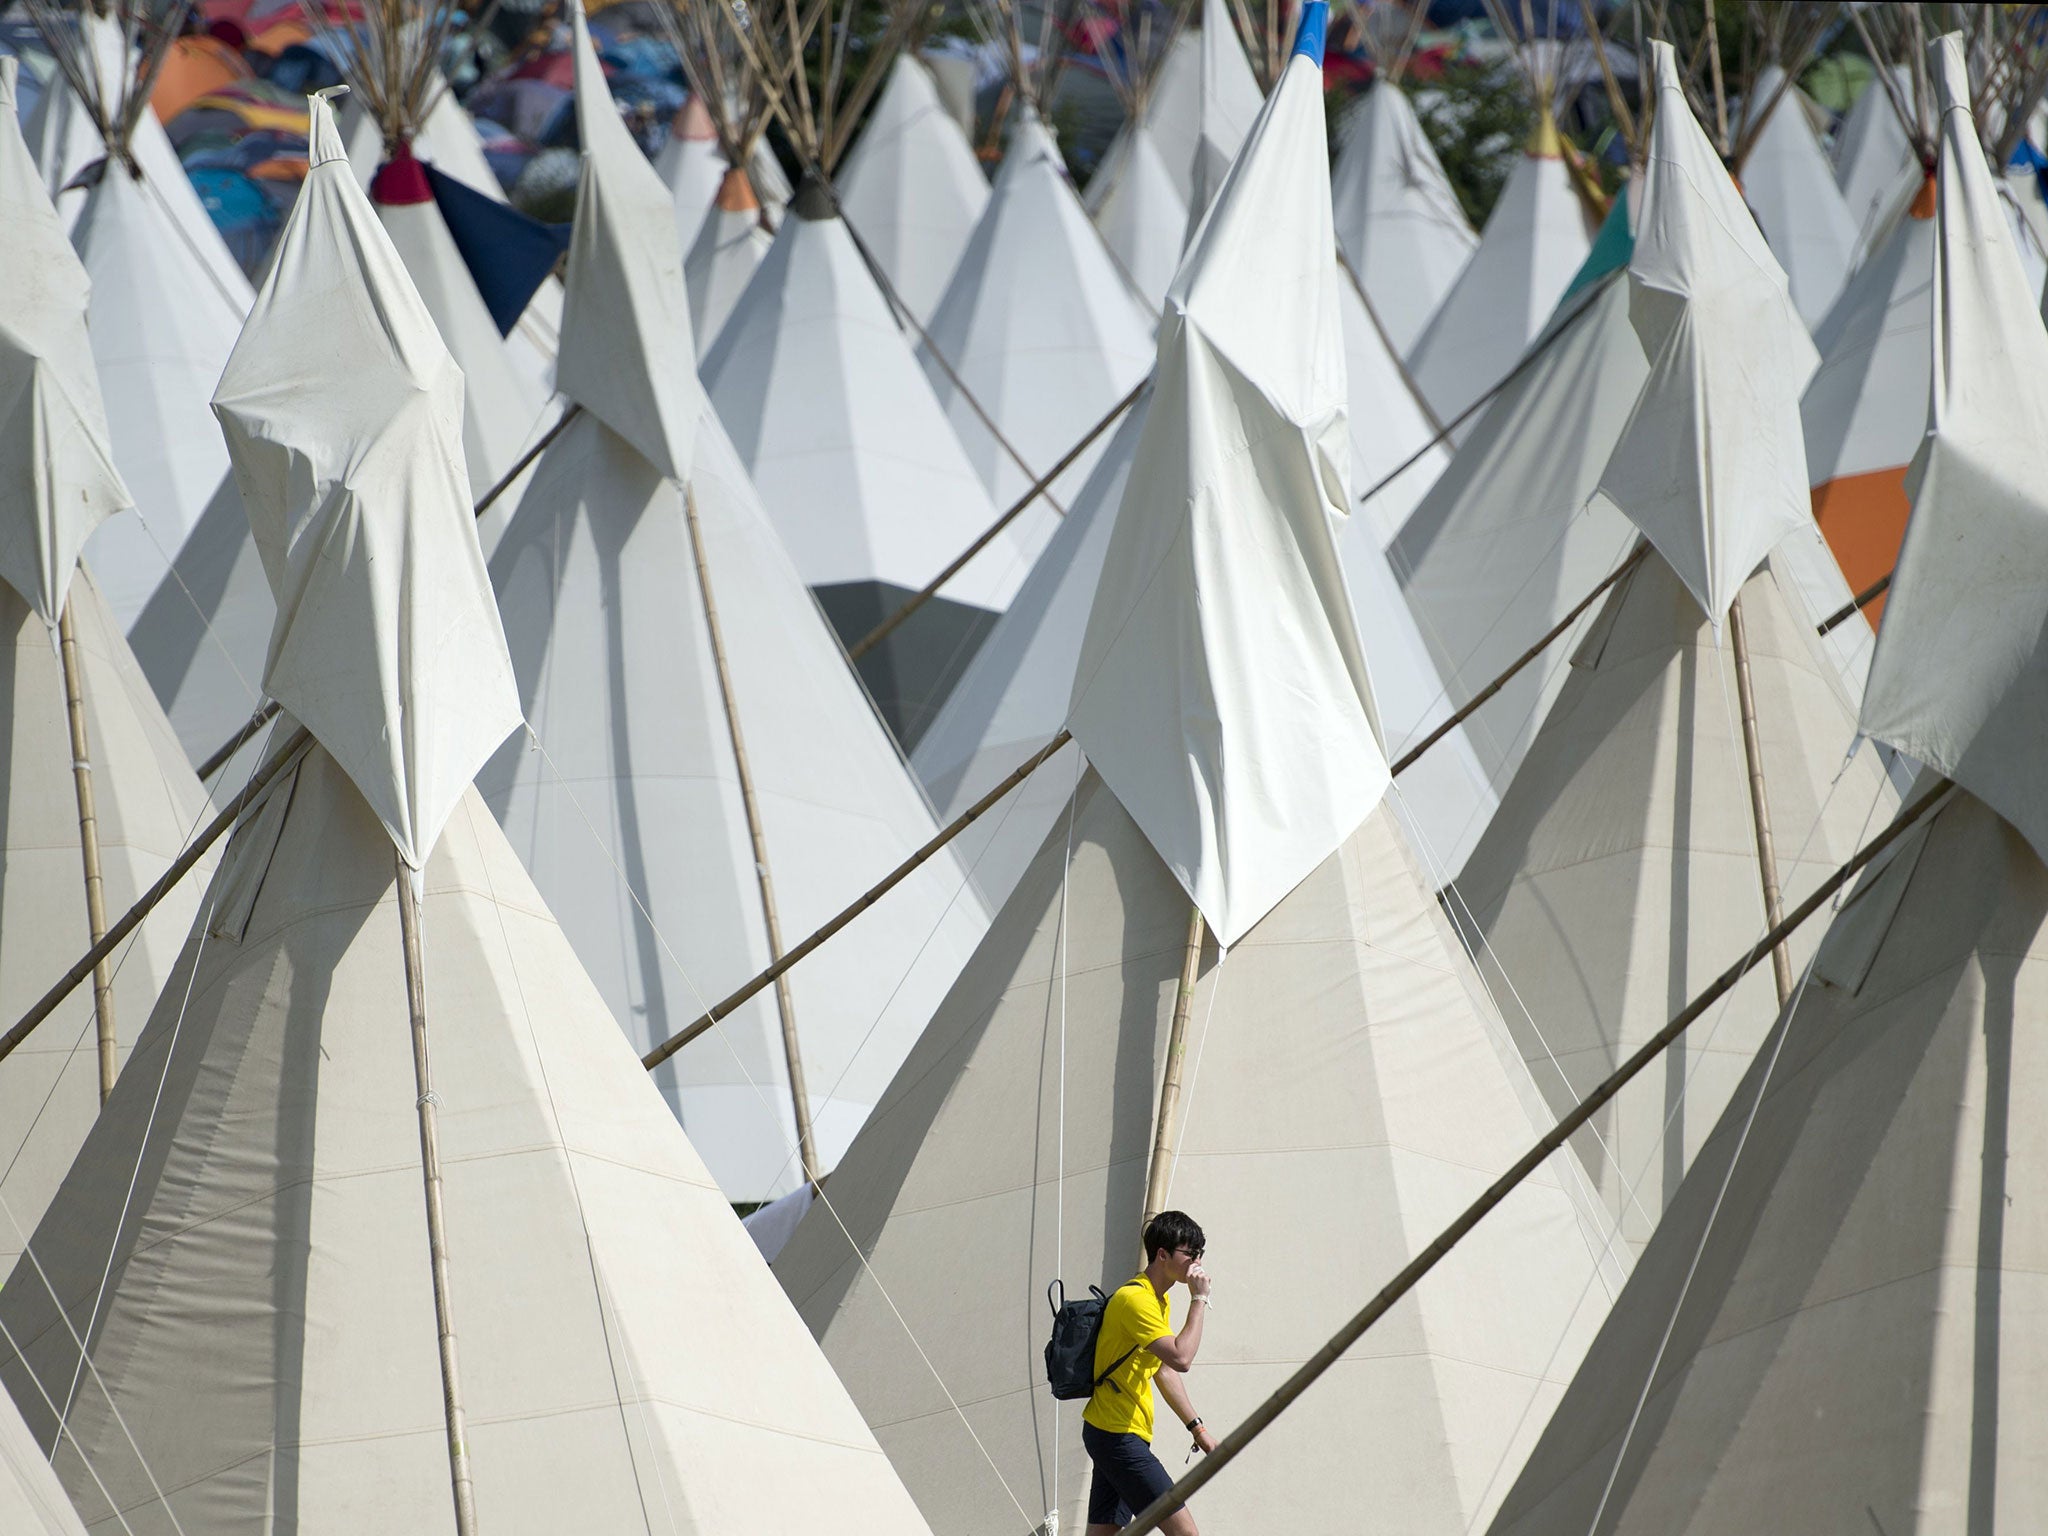 A reveller walks through the Tipi Field area of the Glastonbury Festival of Music and Performing Arts on Worthy Farm near the village of Pilton in Somerset